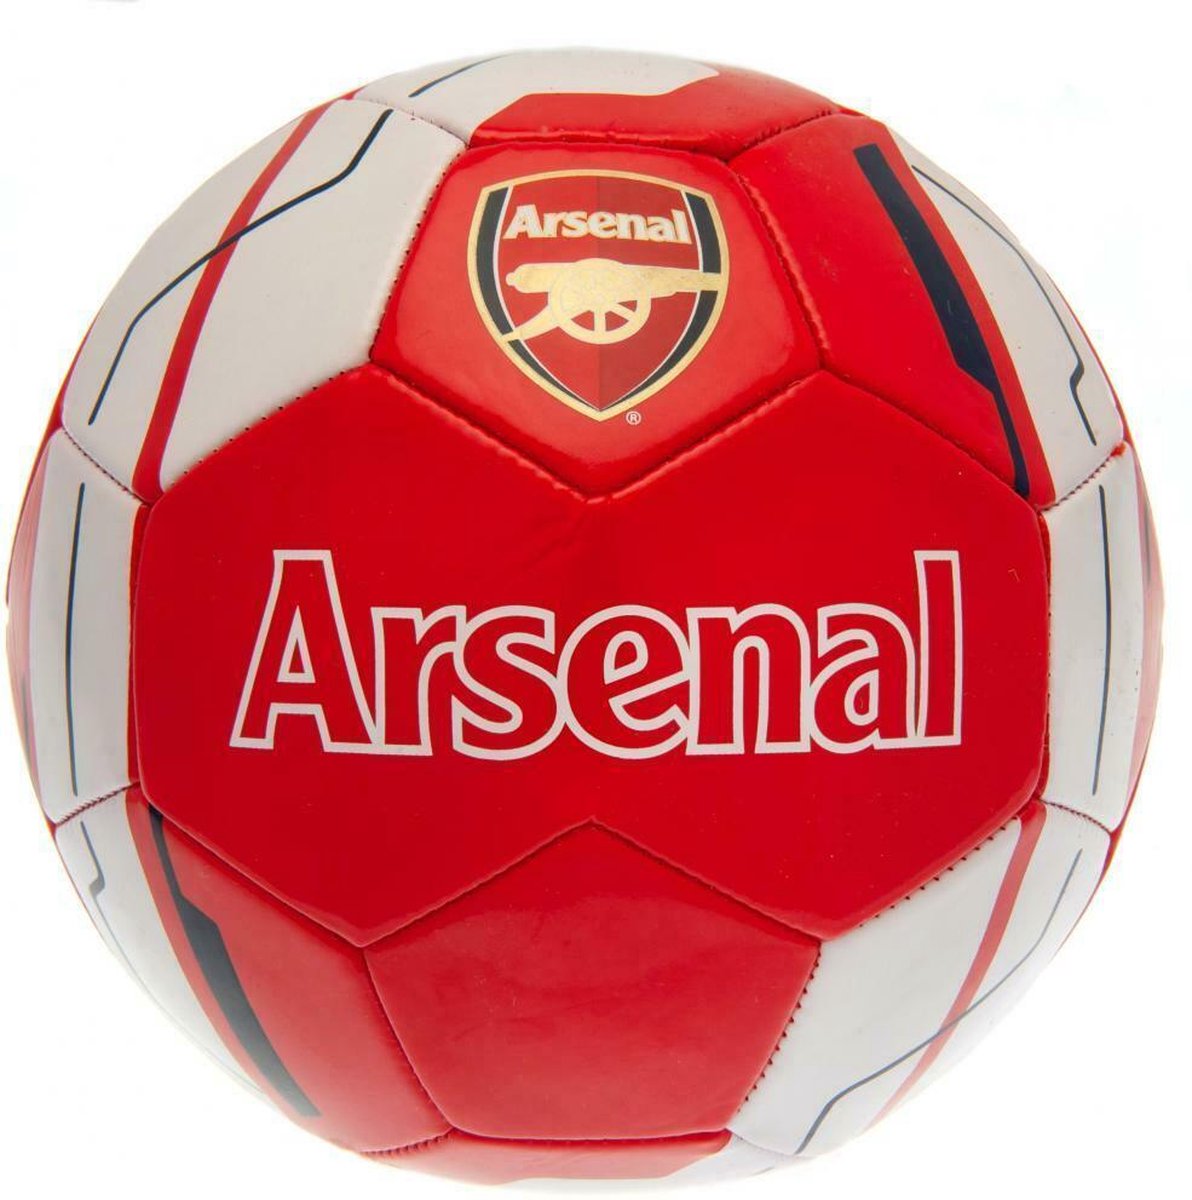 Arsenal FC Football (Red/White)